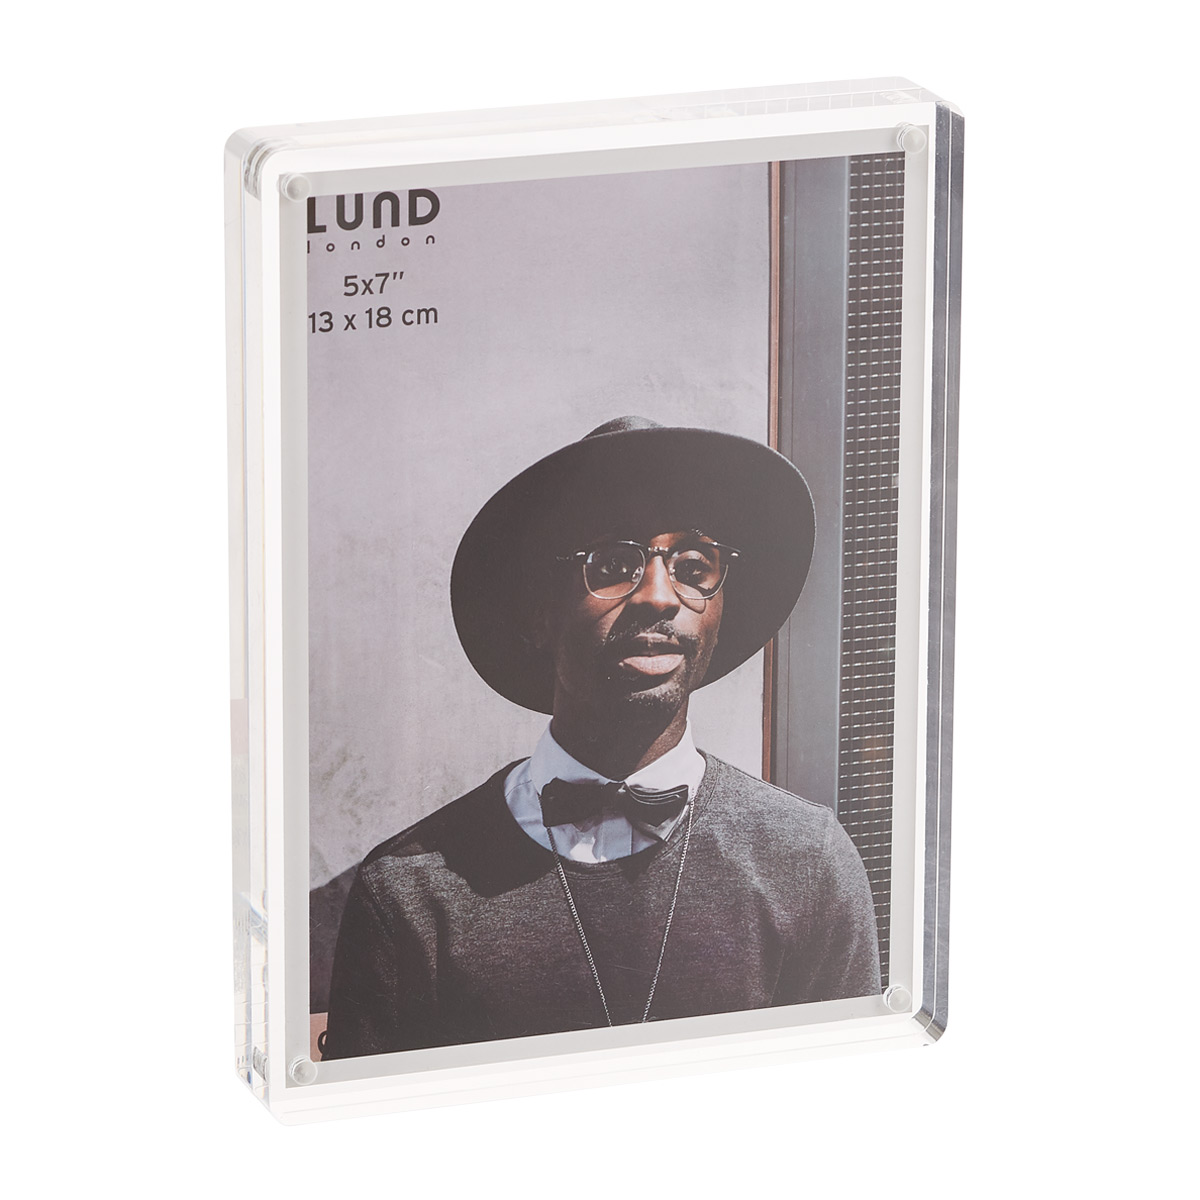 Lund London 5 x 7 Premium Acrylic Photo Frame | The Container Store